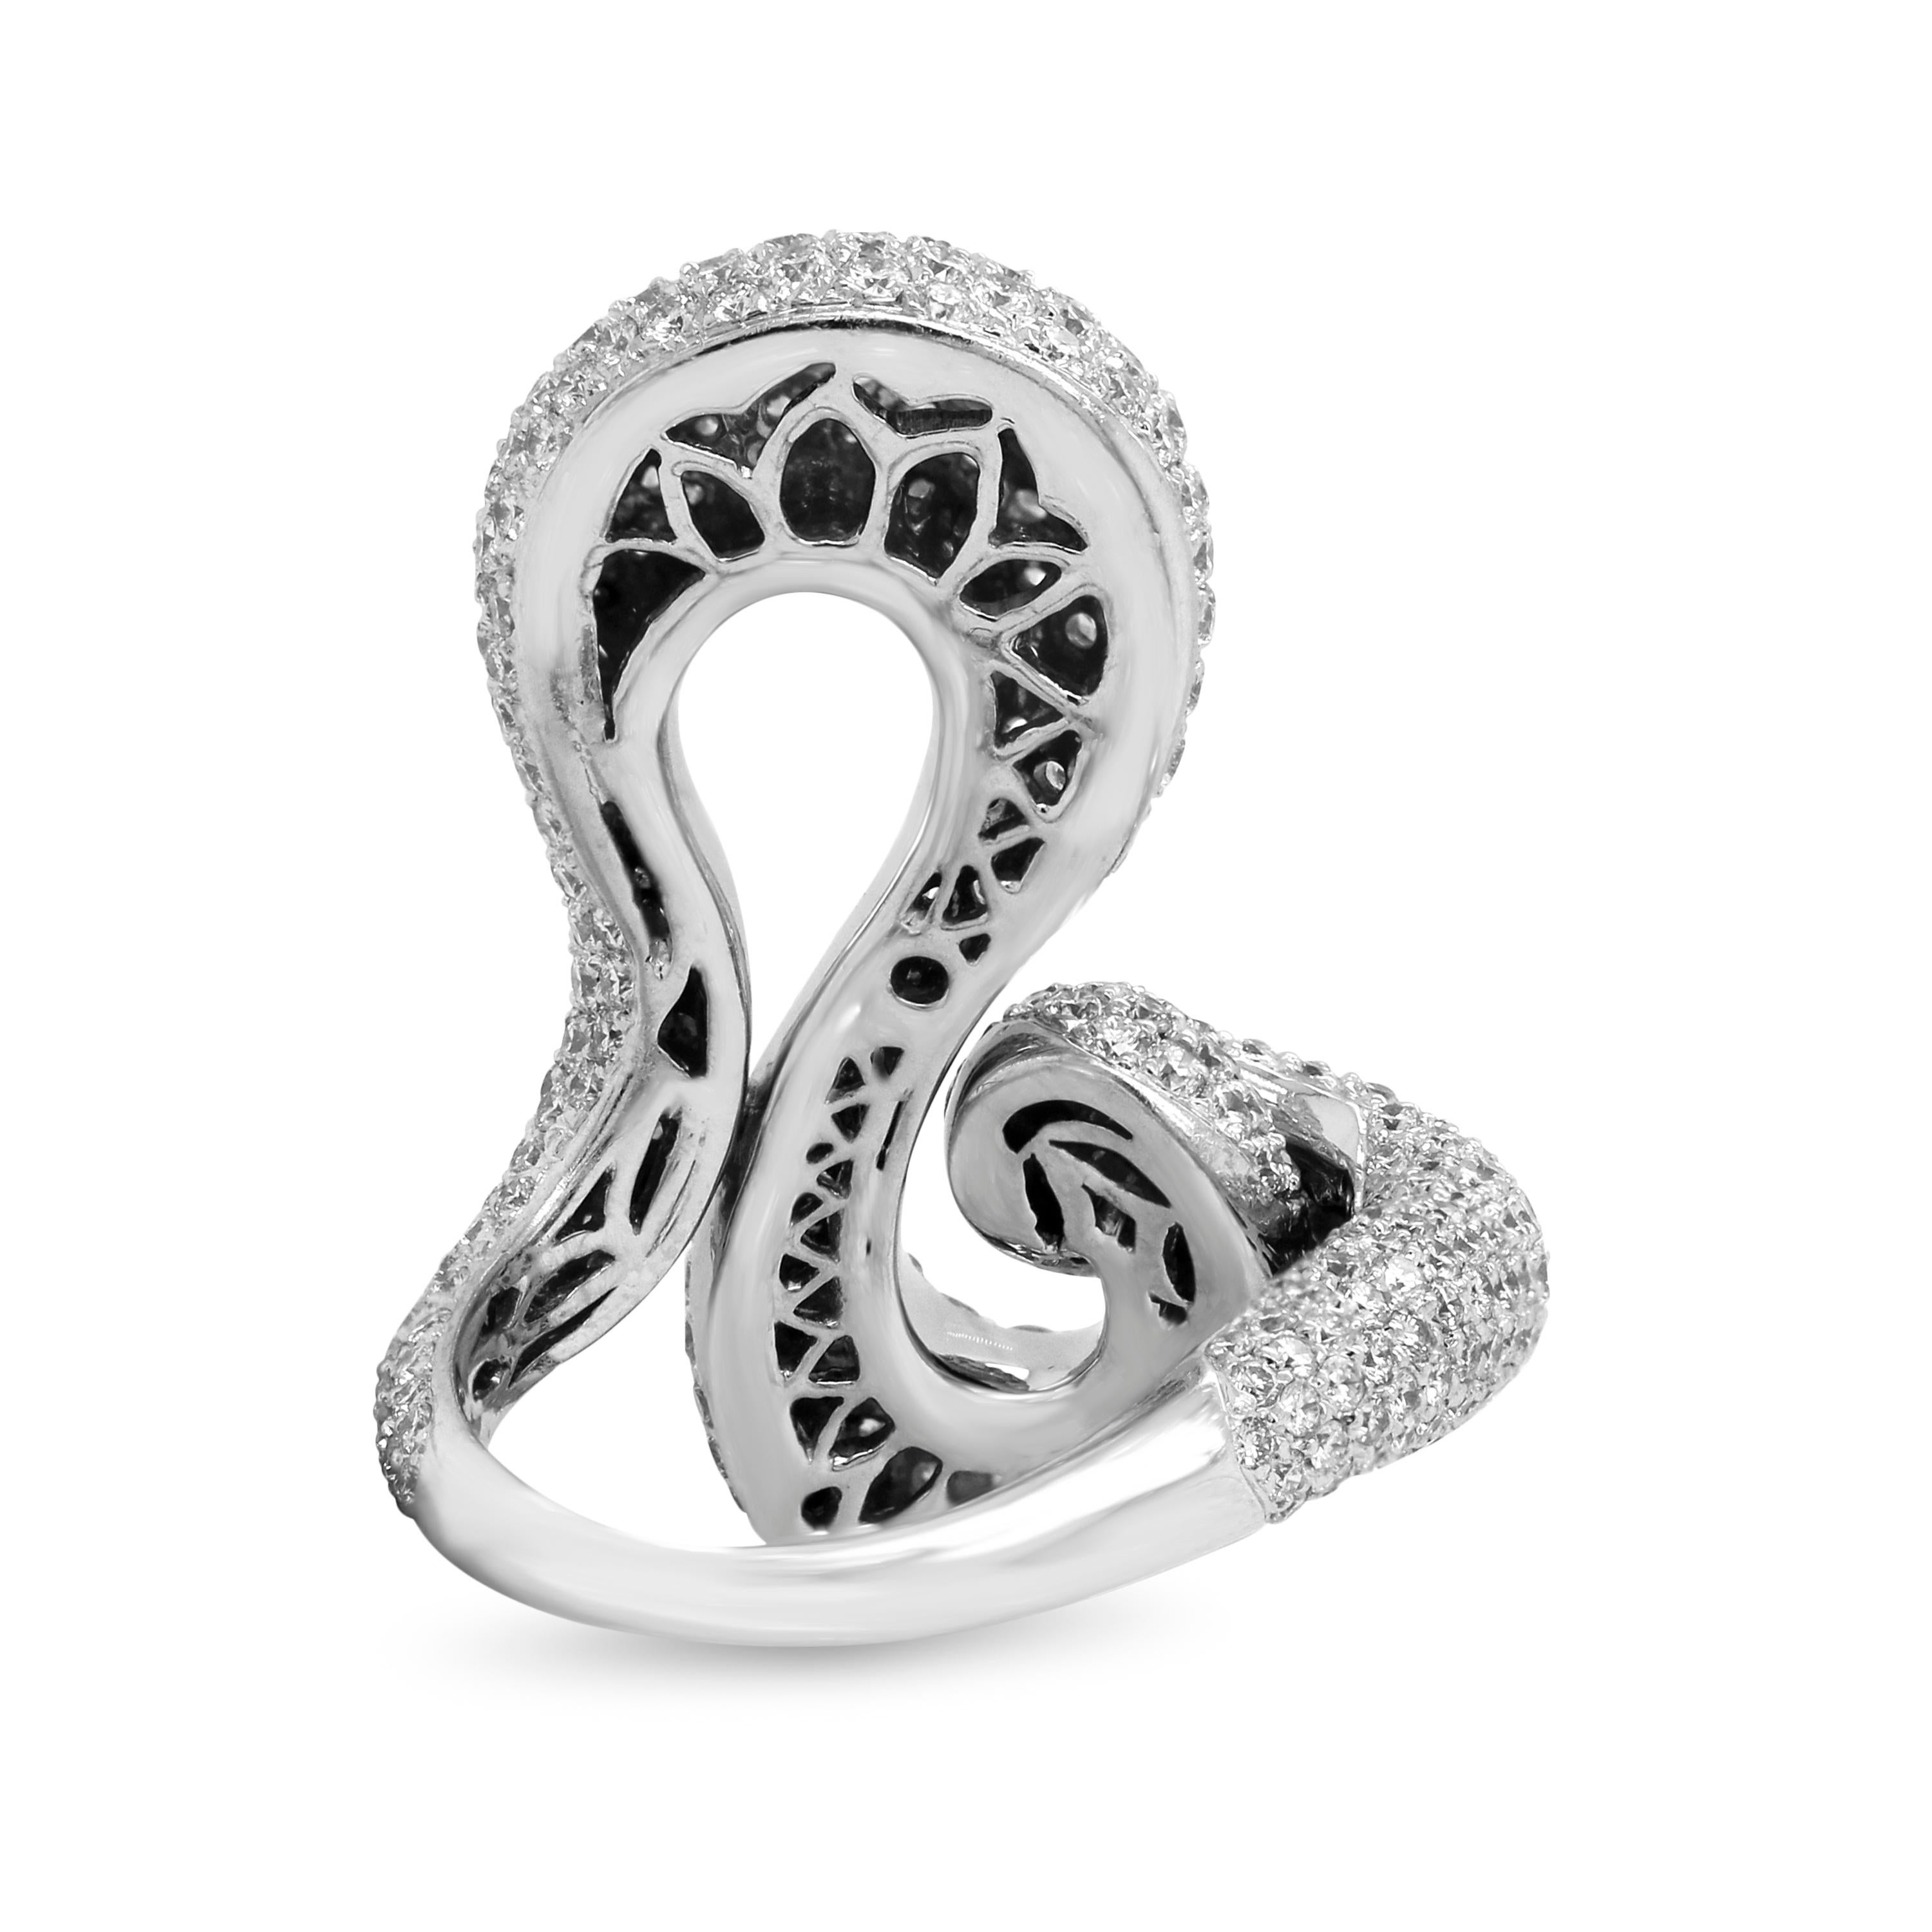 18 Karat White Gold and 5 Carat Diamonds Spiral Shape Curved Ring In New Condition For Sale In Boca Raton, FL